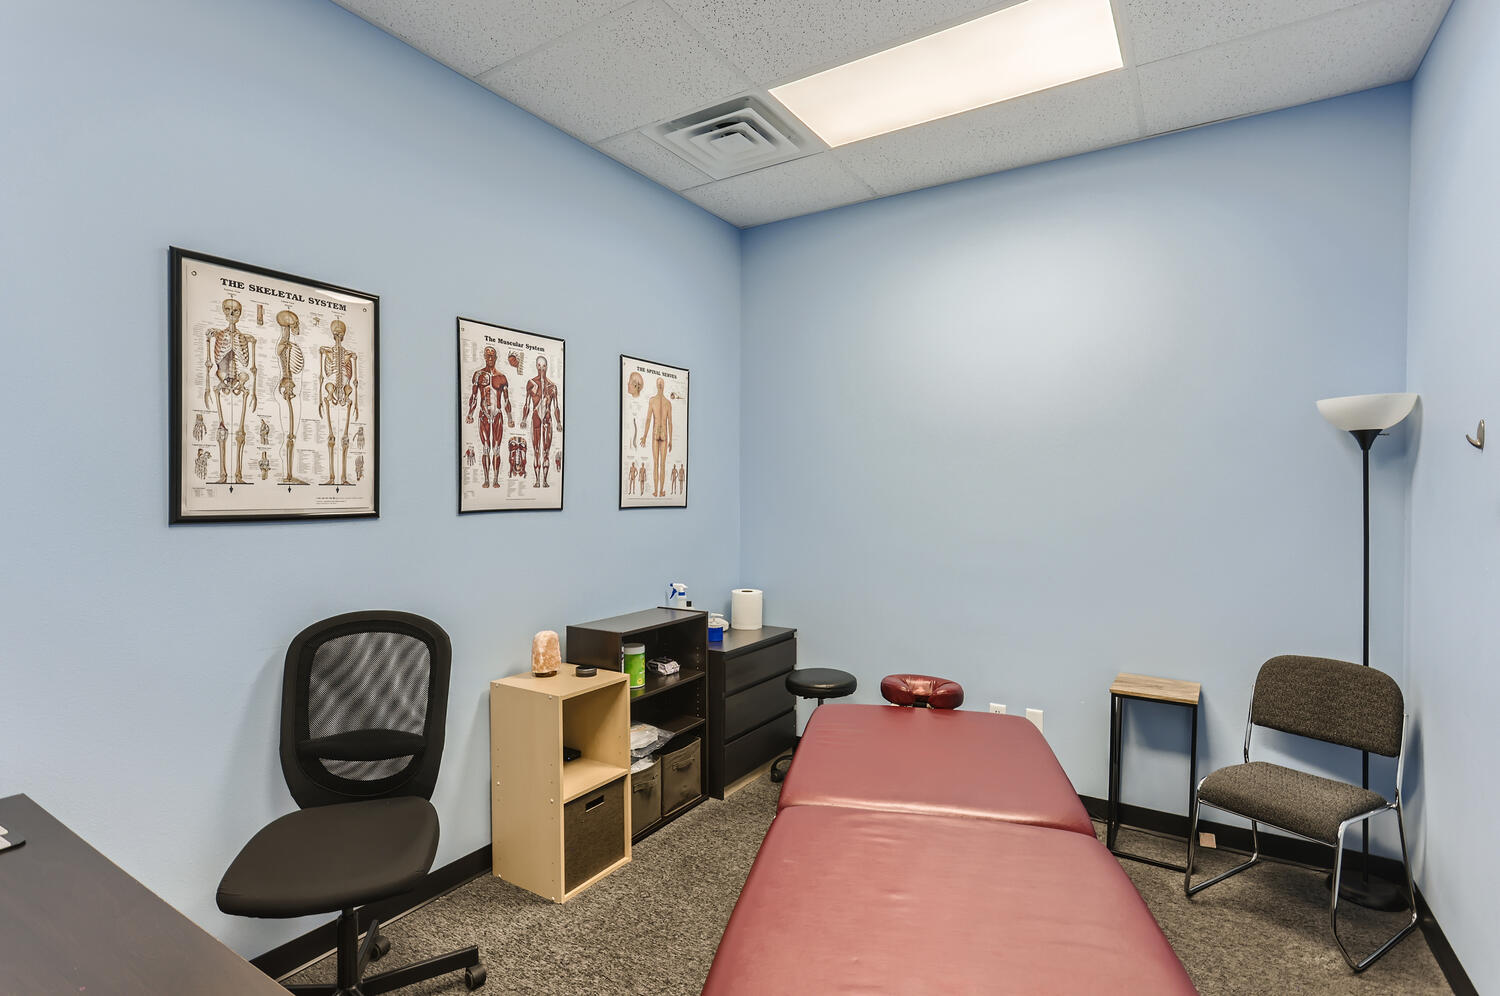 Dr. Richard Feher is a chiropractic physician able to treat neck pain, back pain, headaches, and extremity injuries and has a background in athletic training and car accident injury recovery.